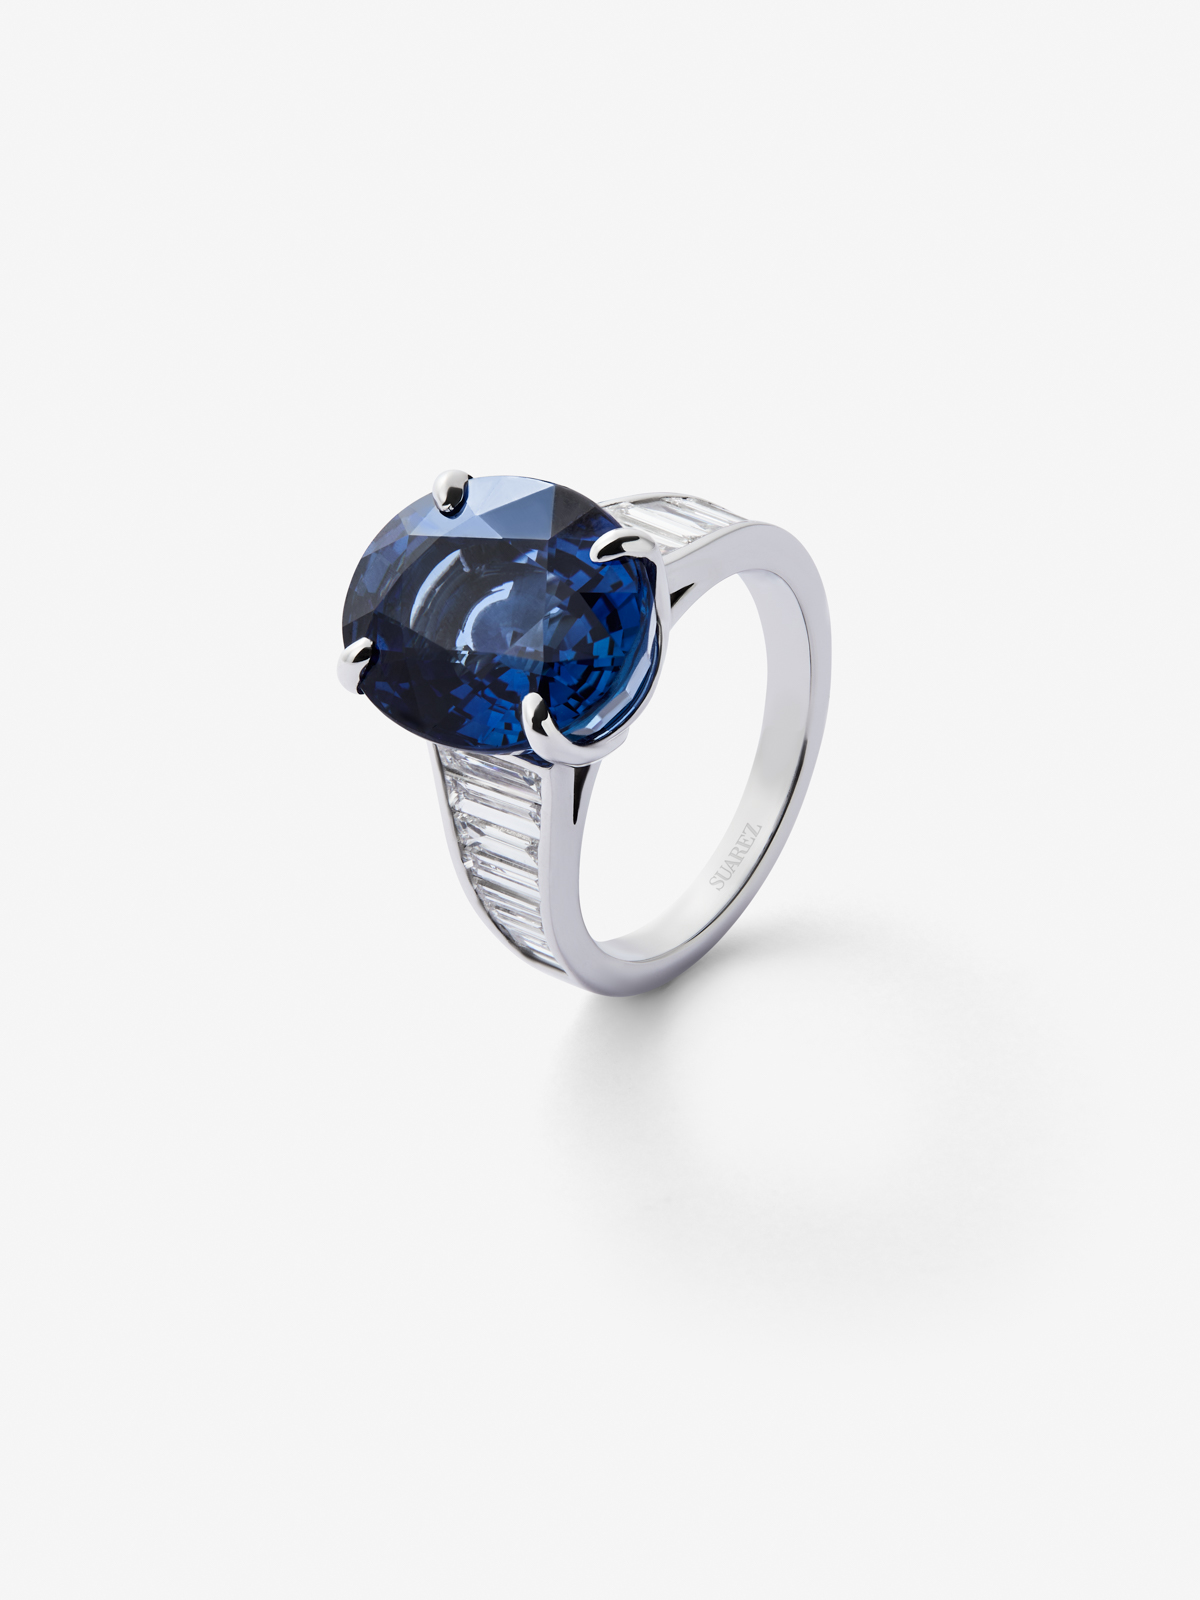 18kt White Gold Ring with 11.18cts Blue Sapphire and Diamond arm